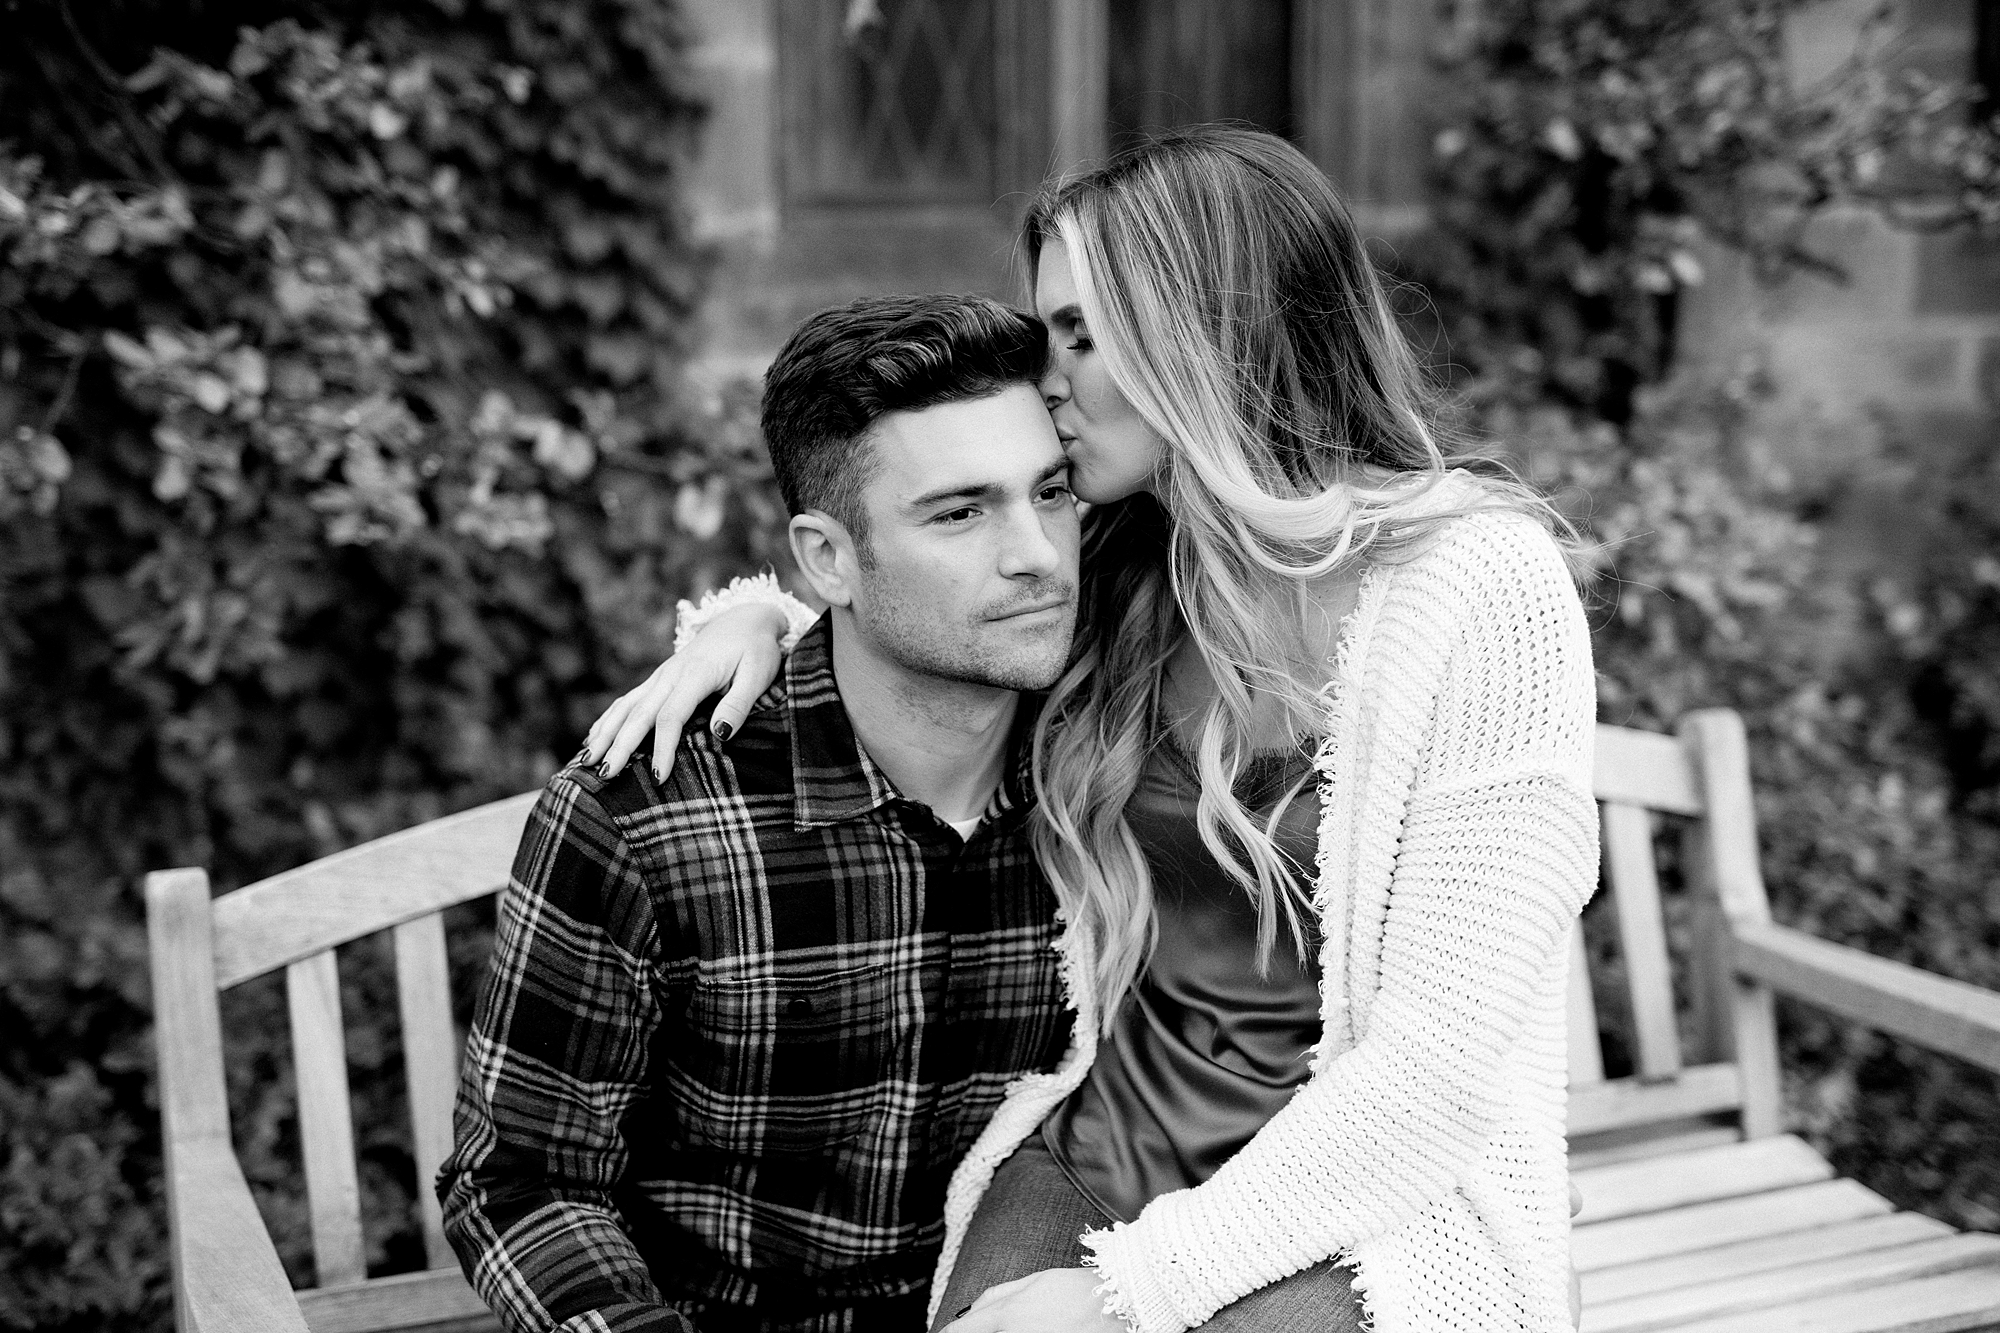 Black and White engagement session | Breanne Rochelle Photography